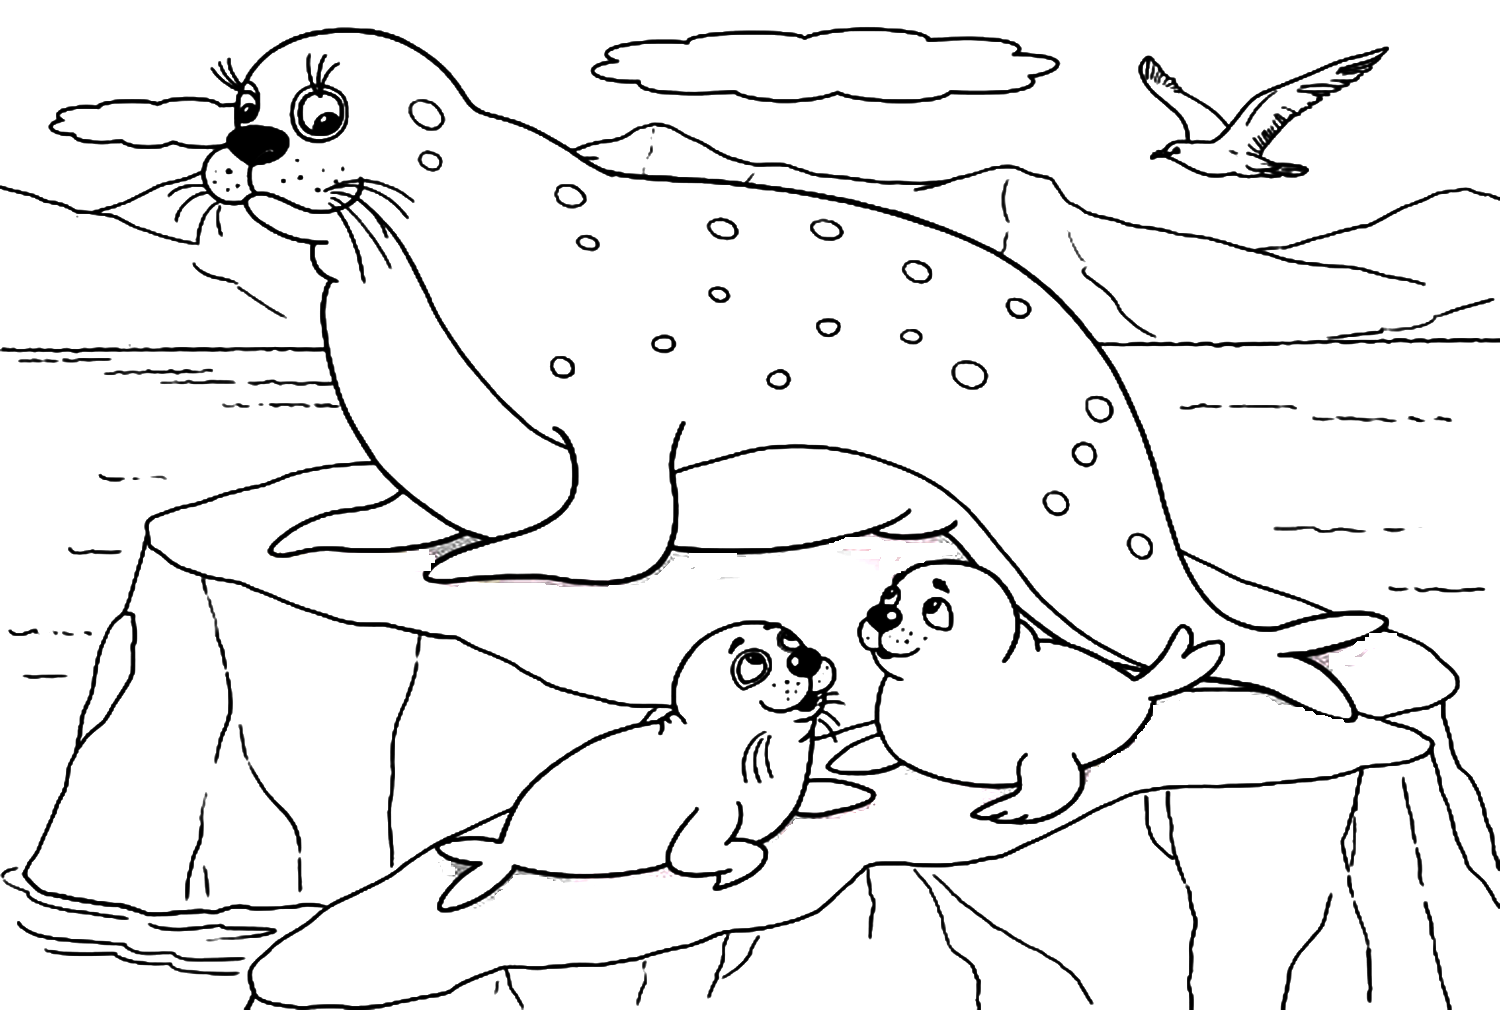 Seal Family from Seal